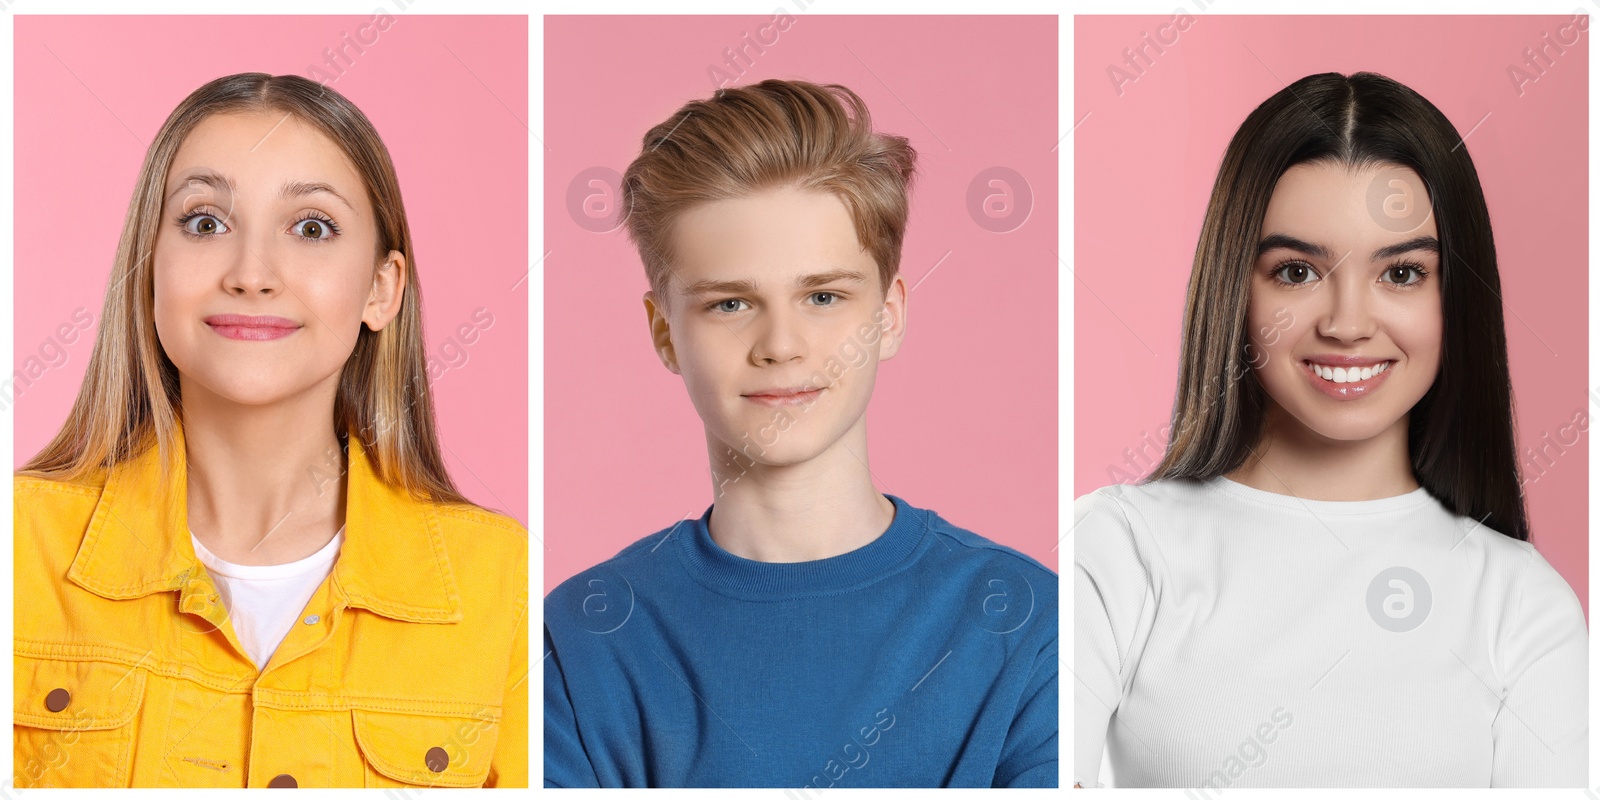 Image of Portraits of teenagers on pink background, collage design